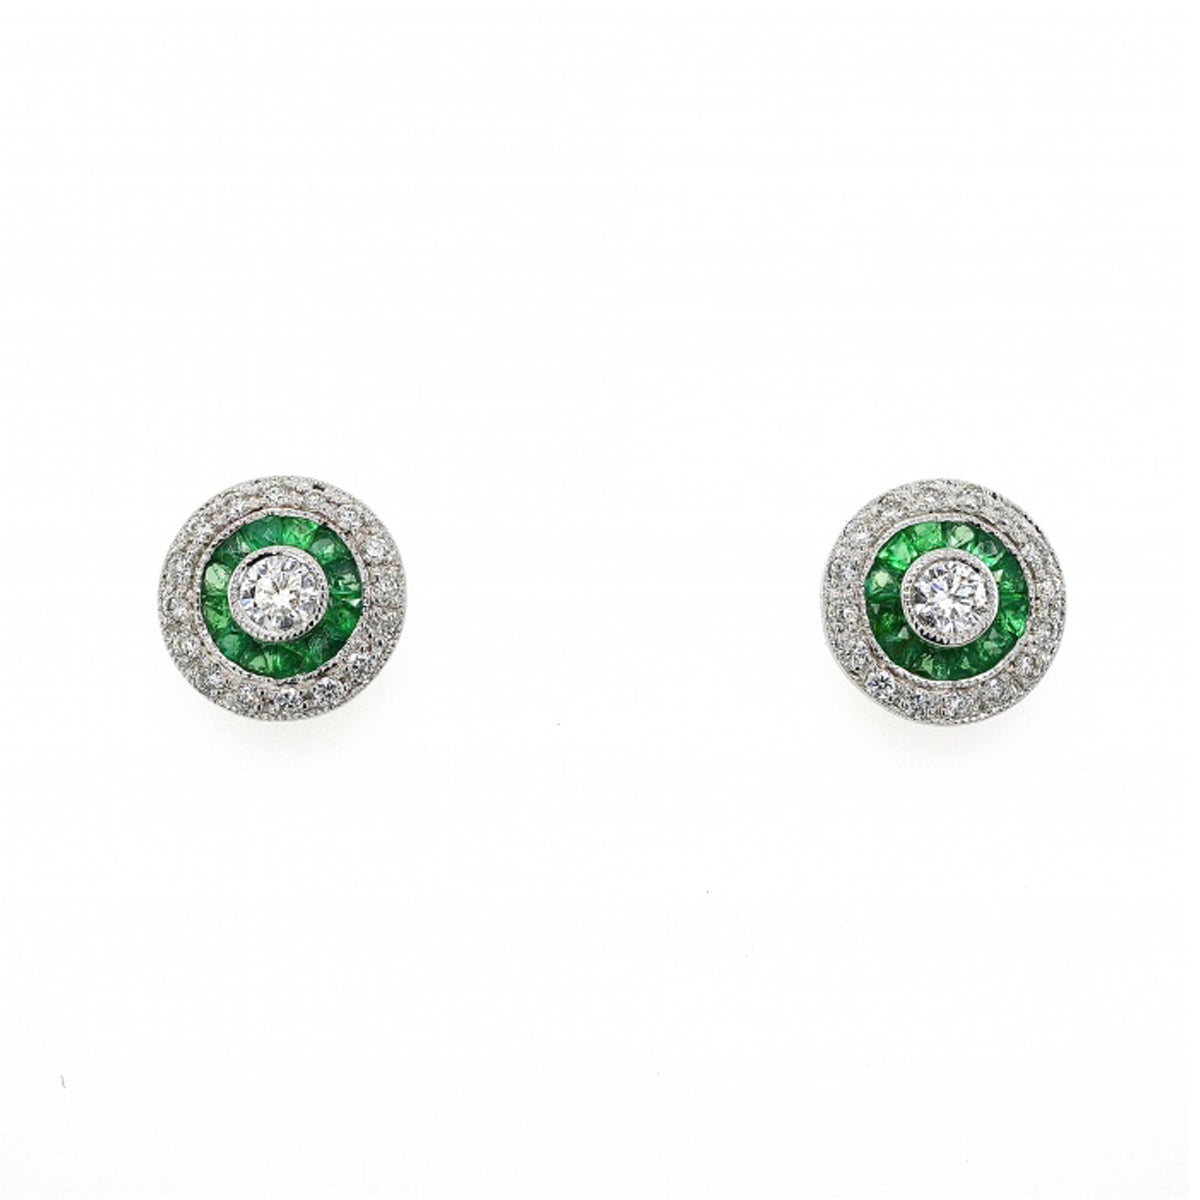 18ct White Gold Emerald and Diamond Art Deco Stud Earrings 0.55ct